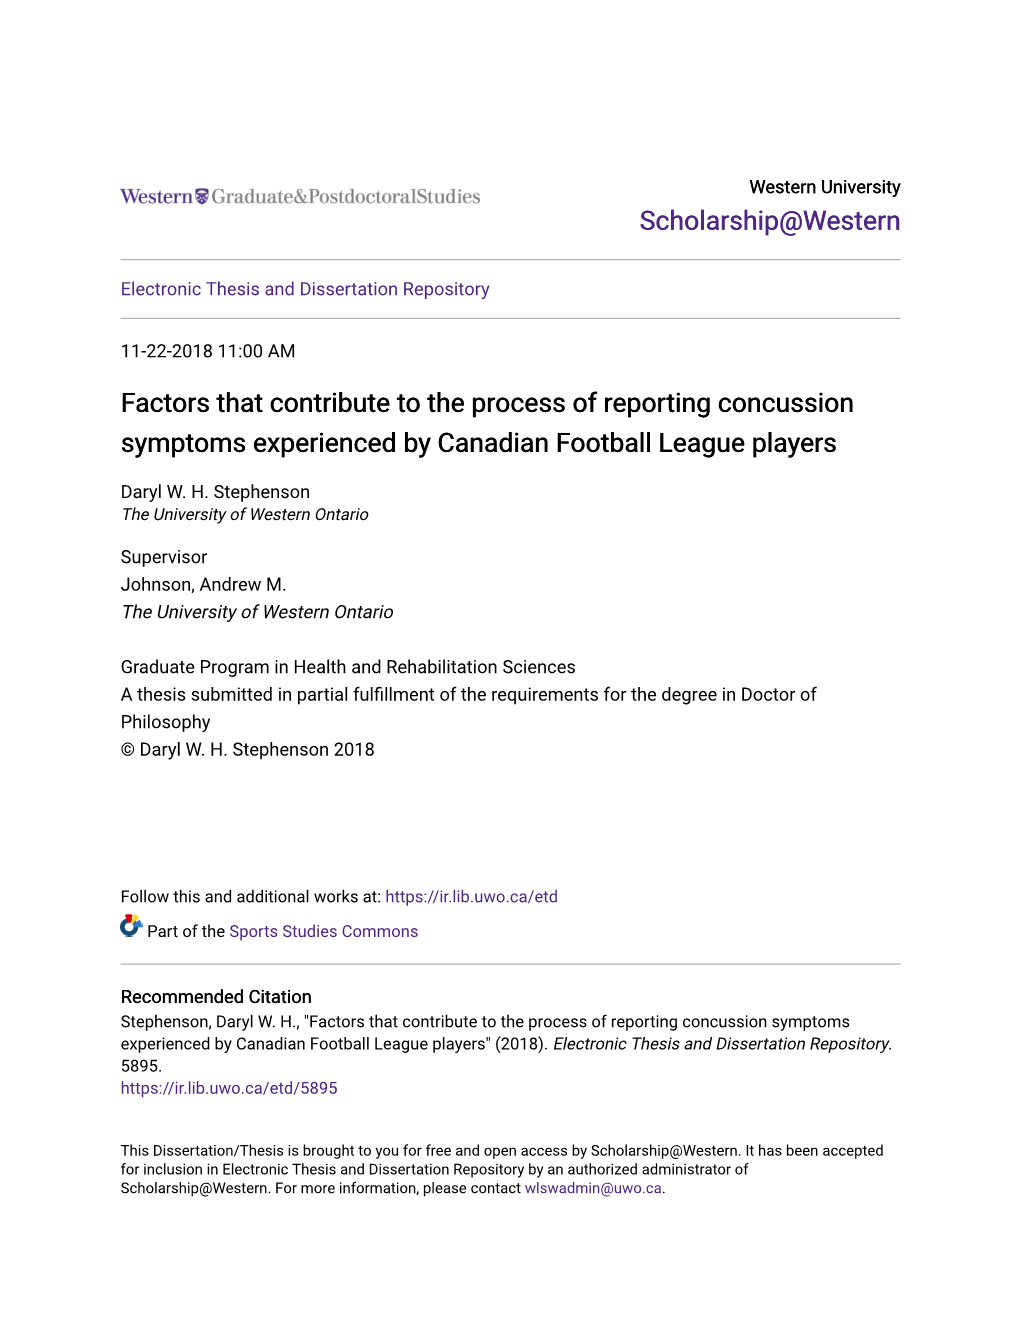 Factors That Contribute to the Process of Reporting Concussion Symptoms Experienced by Canadian Football League Players